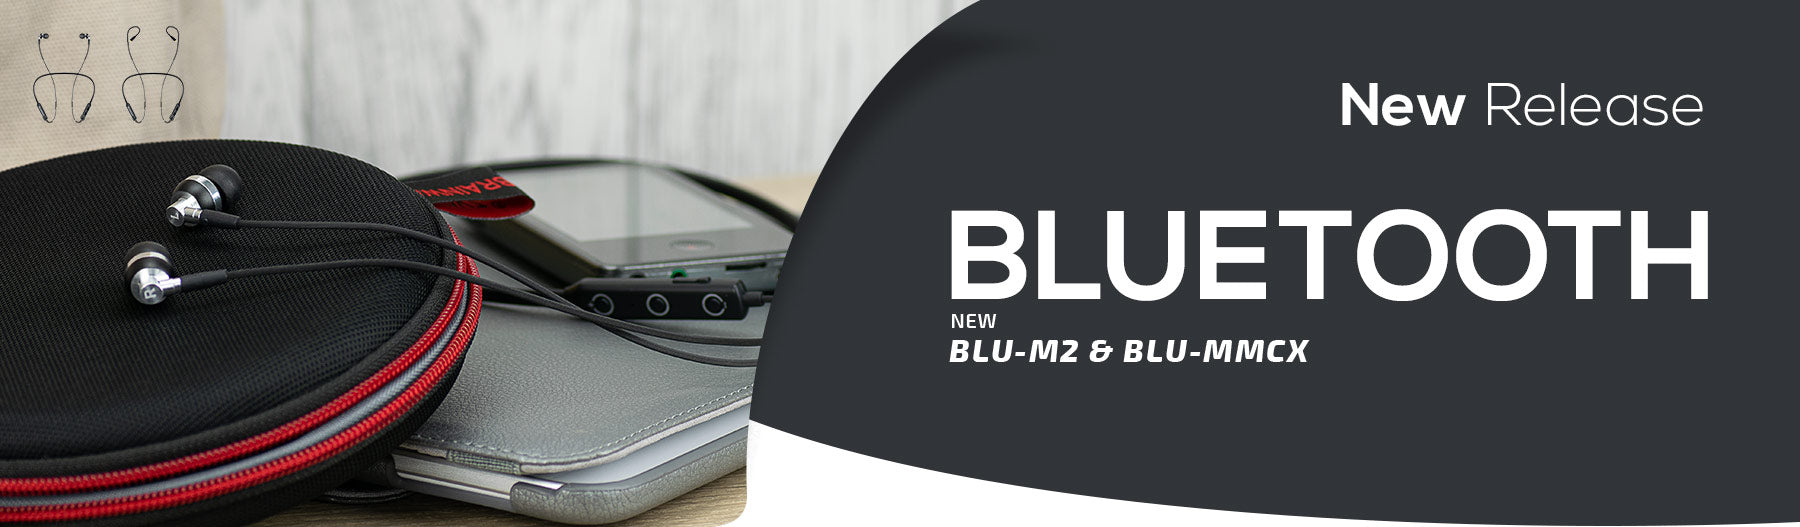 Wireless is back - New Bluetooth Pre-Order